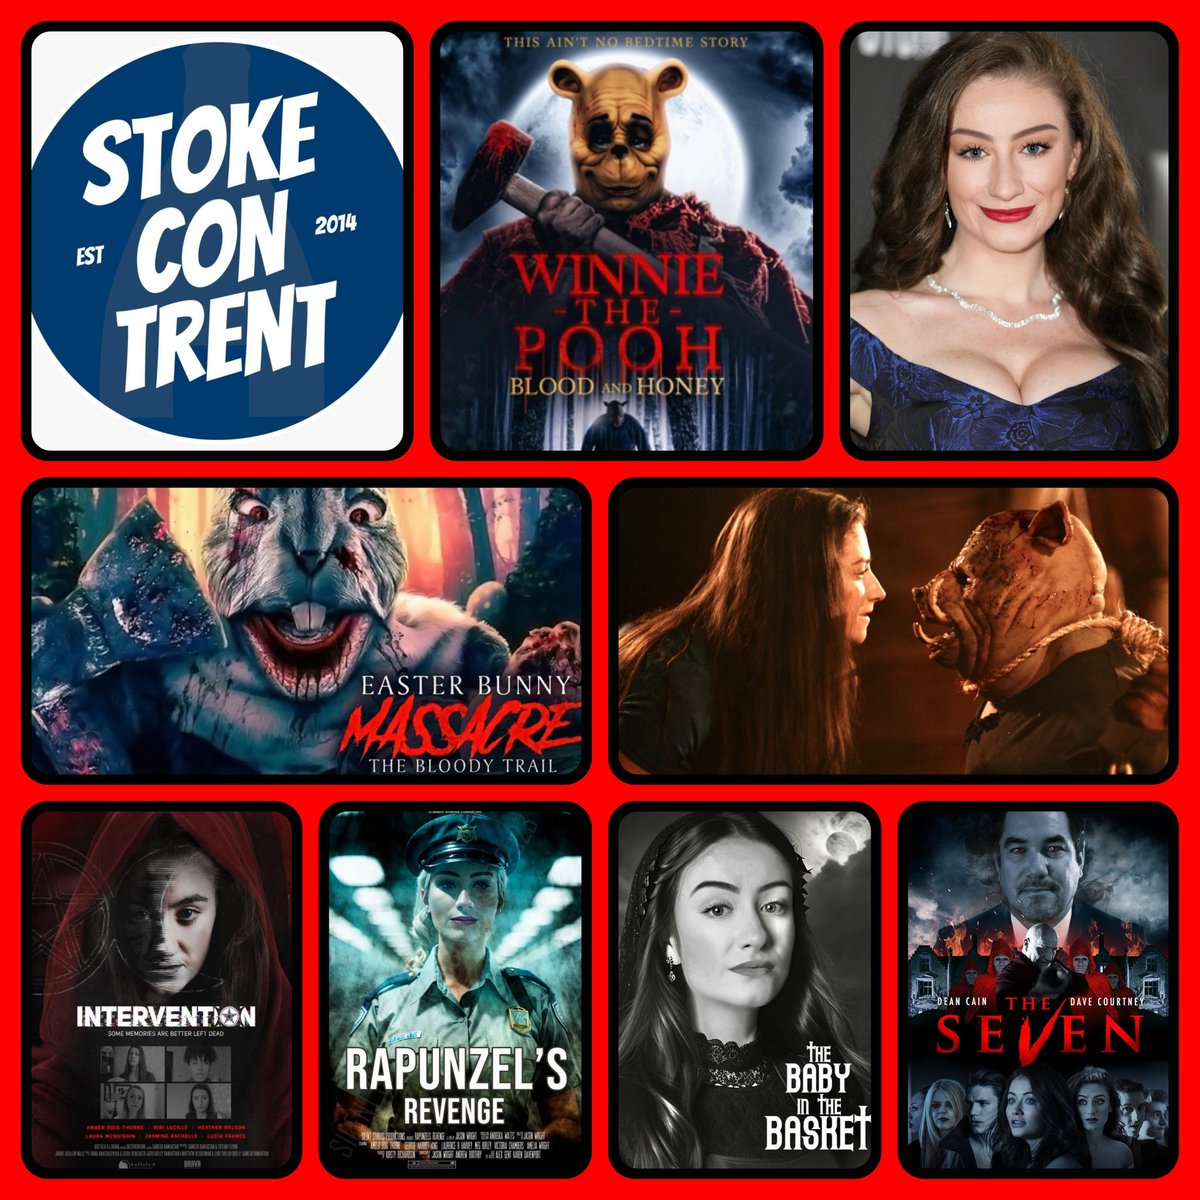 @AmbzDT @poohbandh #Easterbunnymassacre #theinthebasket #repunzelsrevenge #intervention appearing at @stokecontrent @StaffsUni on Sunday the 16th of June 2024 courtesy of @andybrittle1